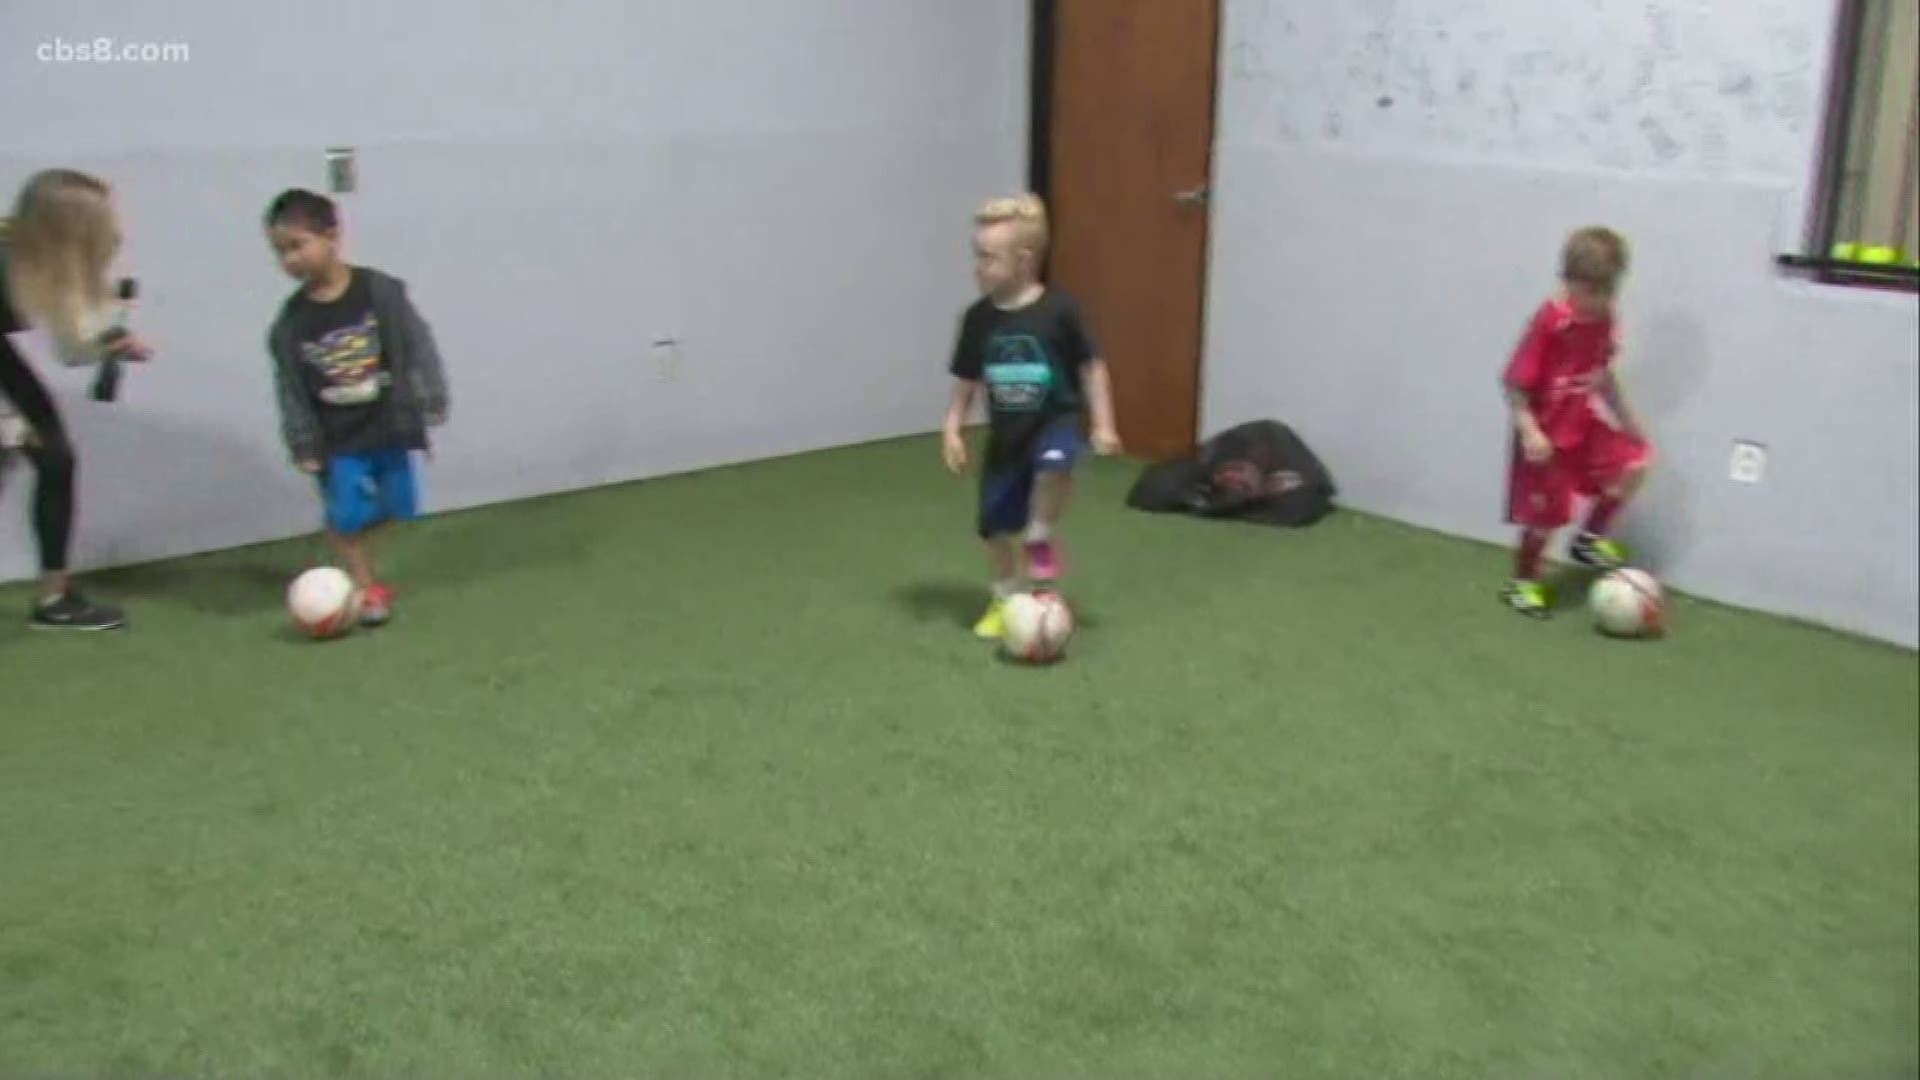 Kids of all ages can learn to play soccer using brand new equipment and the most up to date techniques at Momentum Training Center.